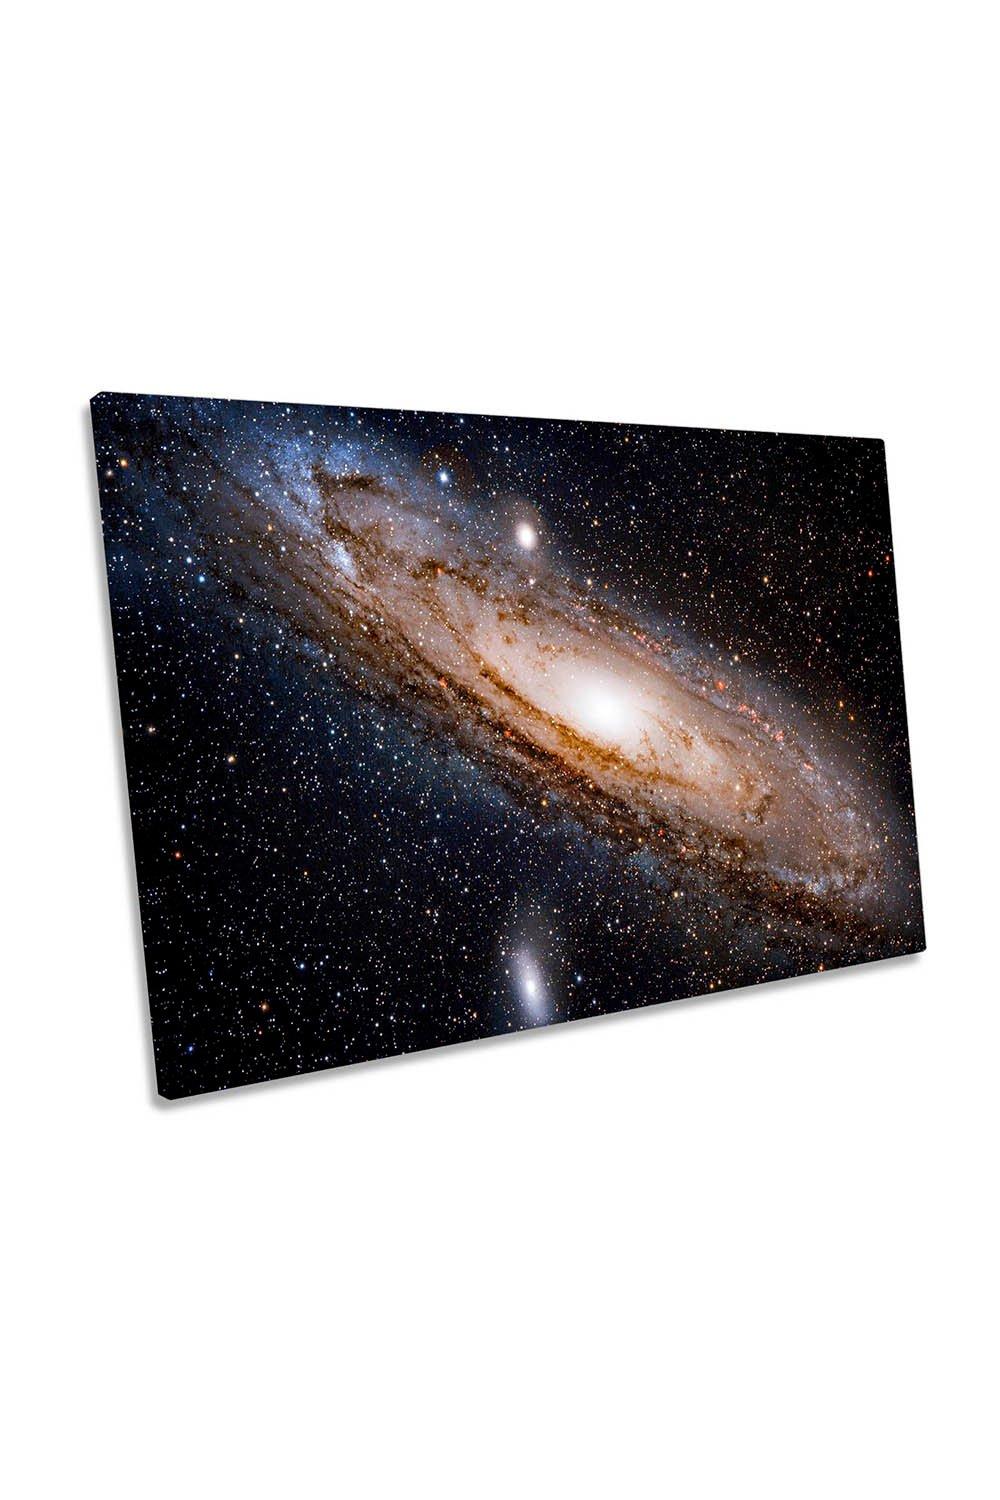 Andromeda Galaxy Nebula Outer Space Canvas Wall Art Picture Print